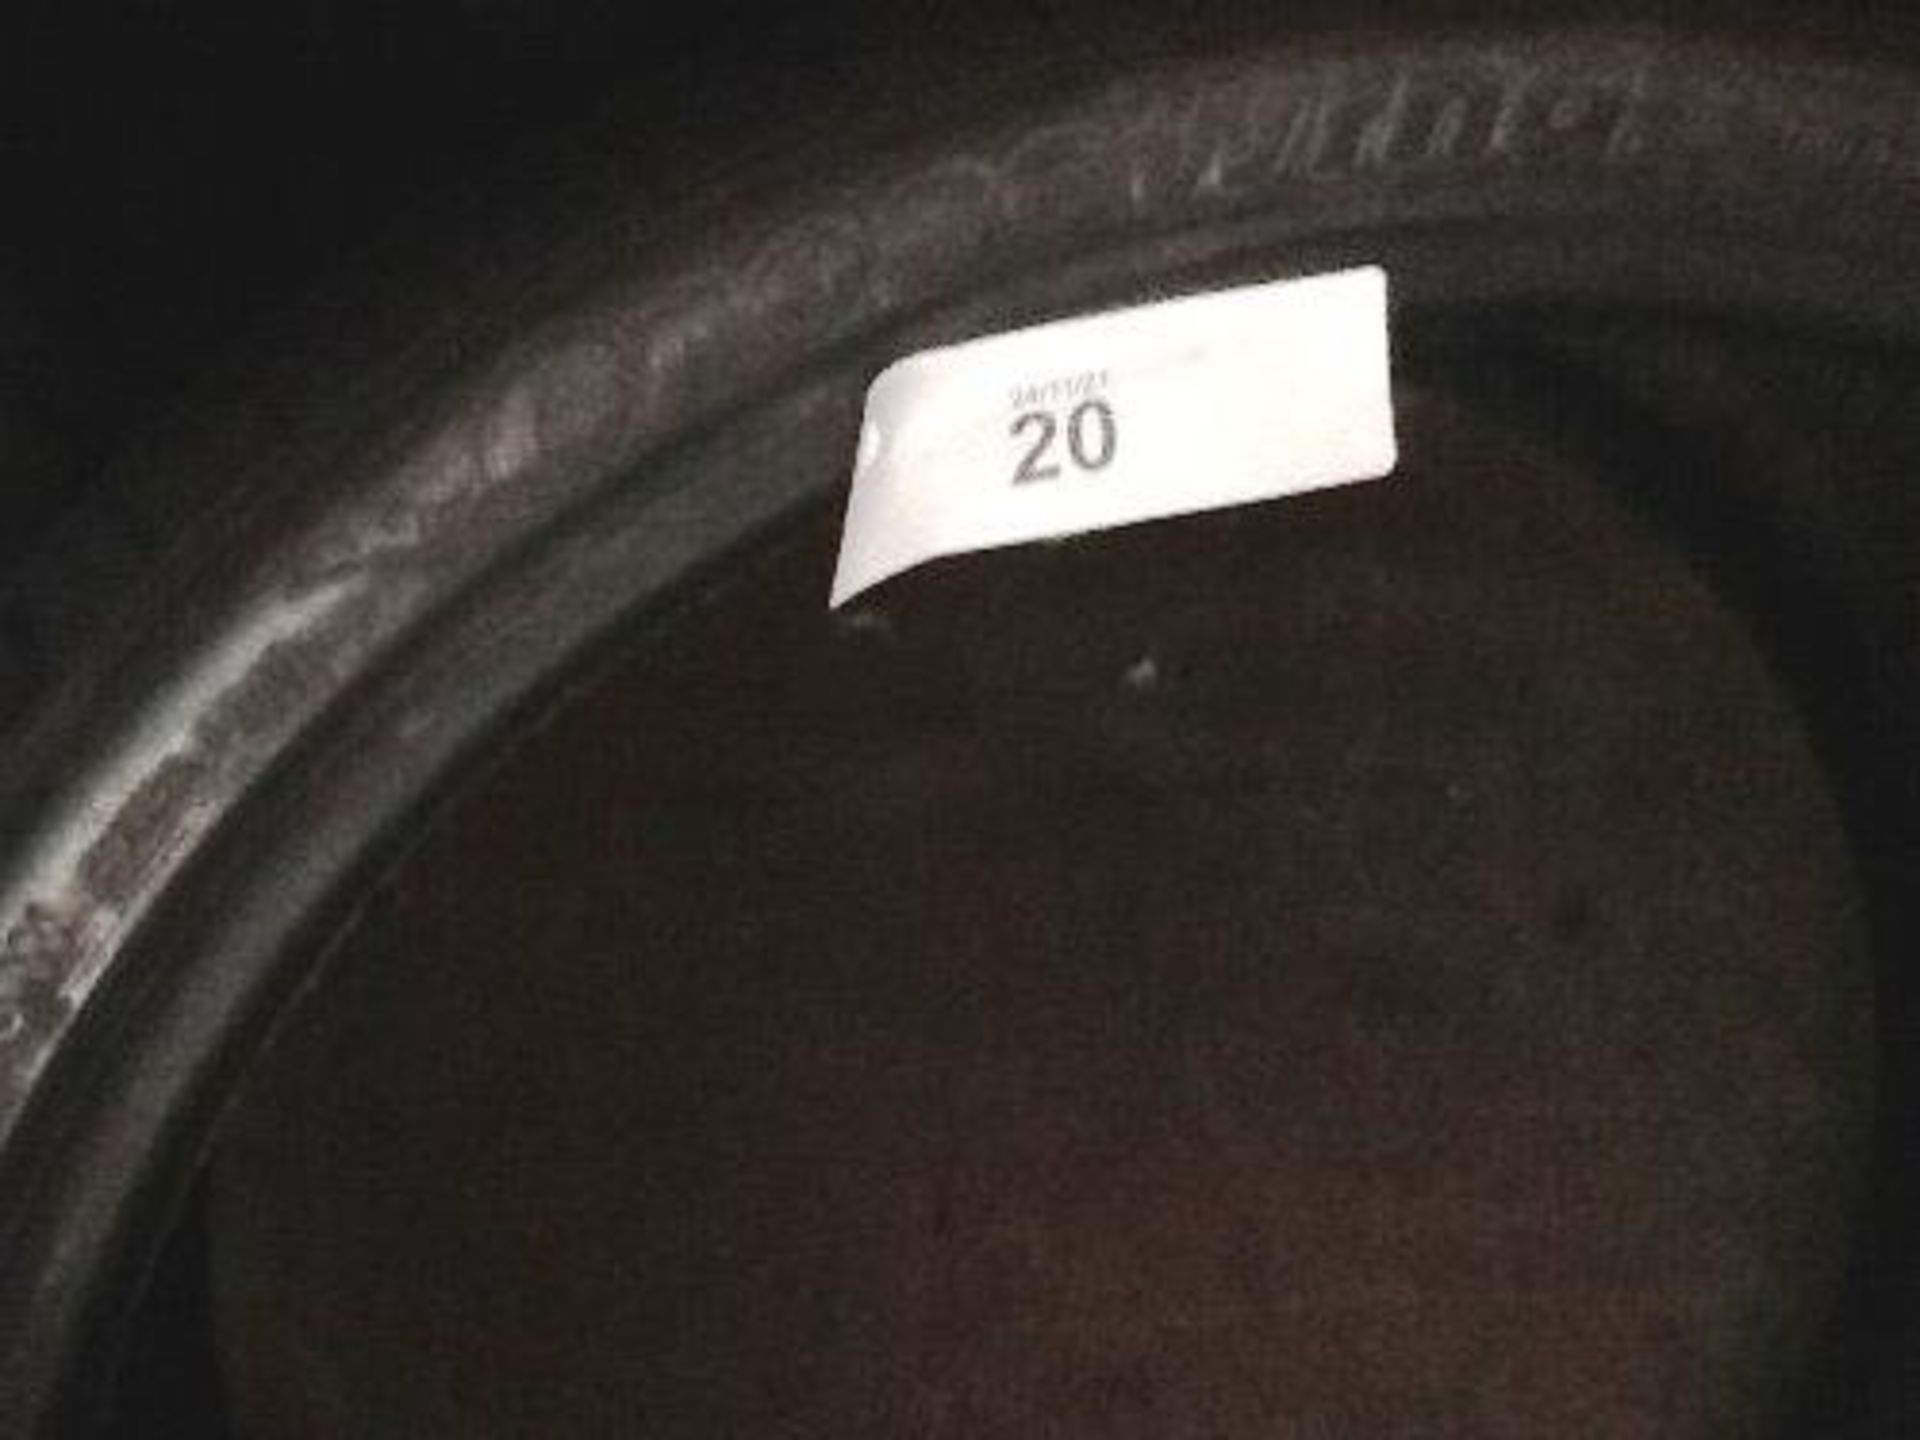 1 x Cross Wind extra-load tyre, size 265/30R19 93W - New (GS16) - Image 2 of 2